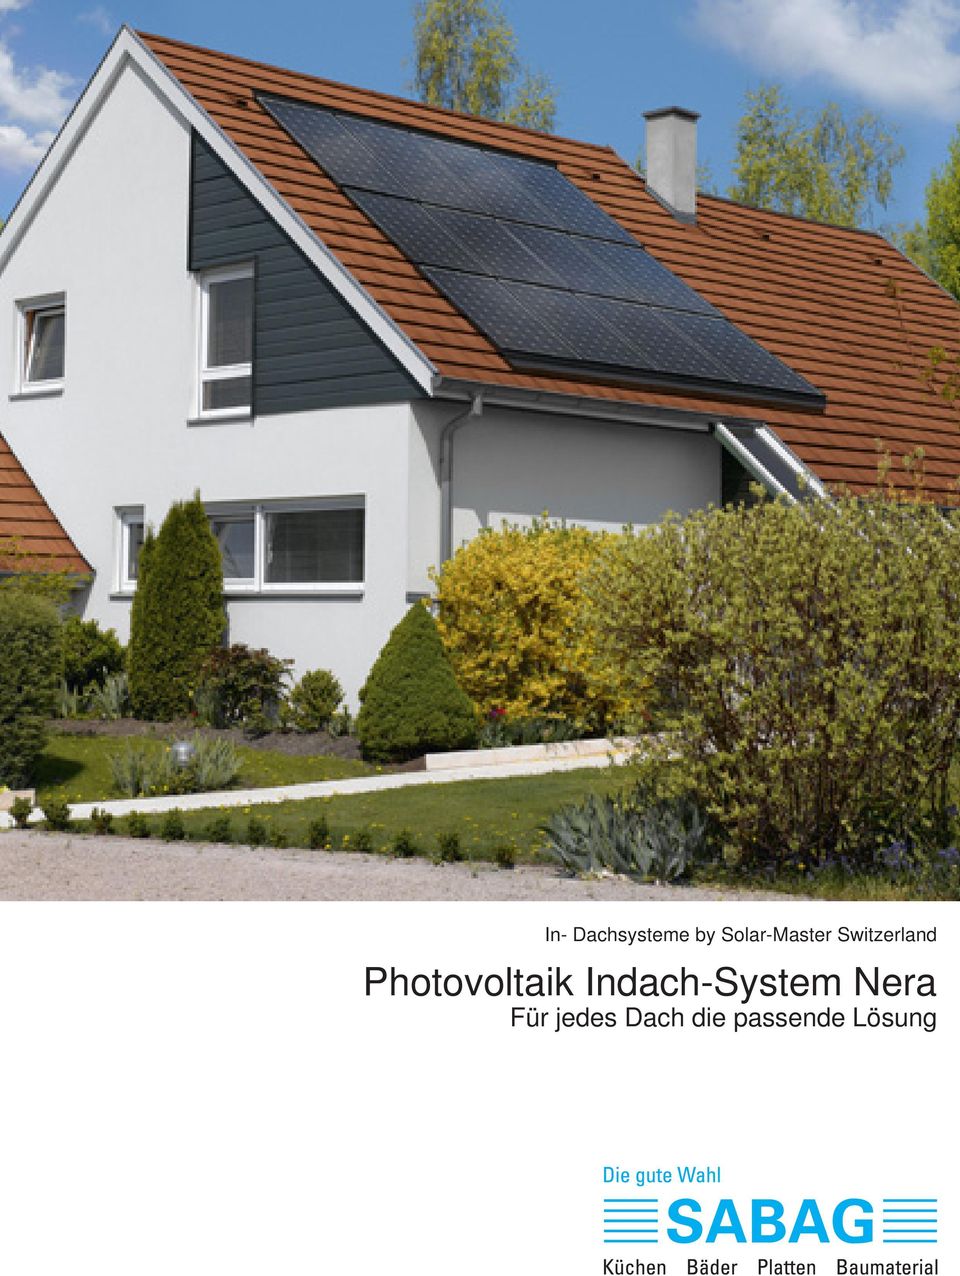 Photovoltaik Indach-System